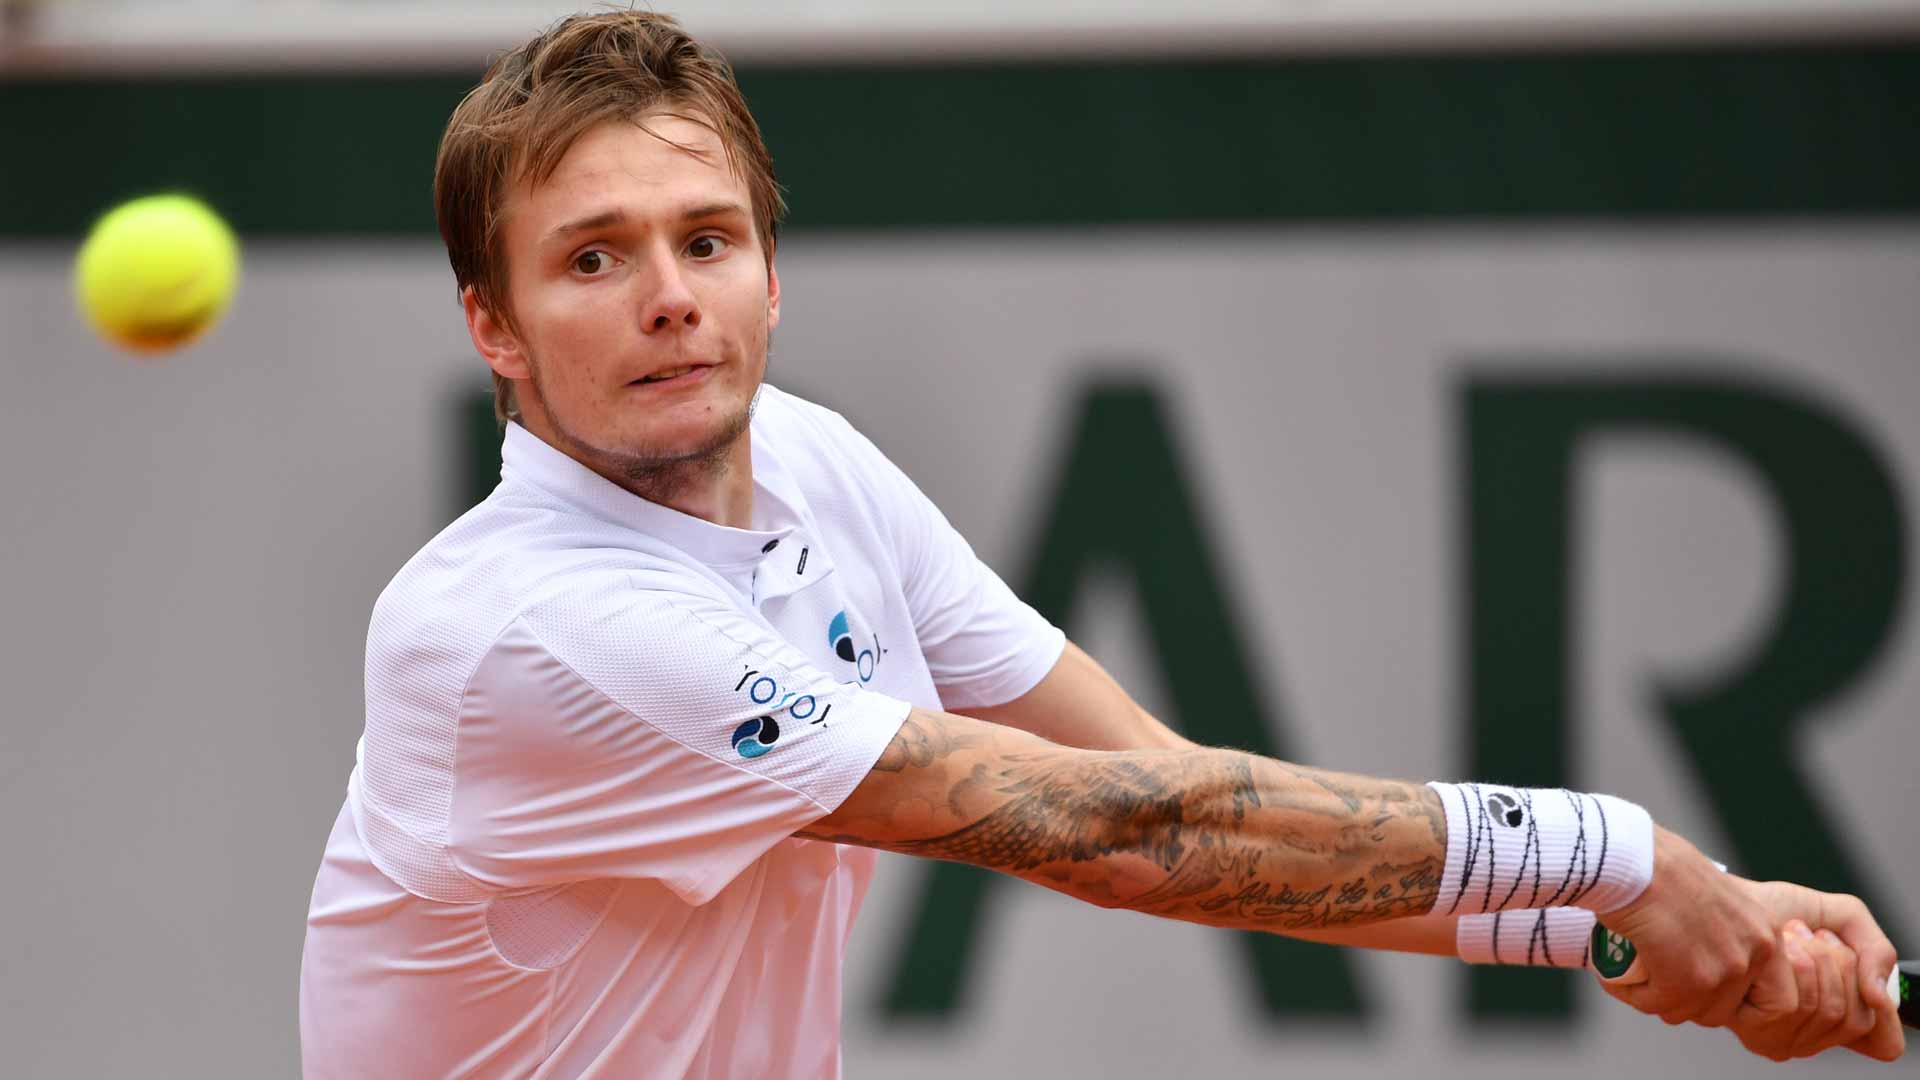 How Less Counting Is Turning Into More Winning For Alexander Bublik Atp Tour Tennis